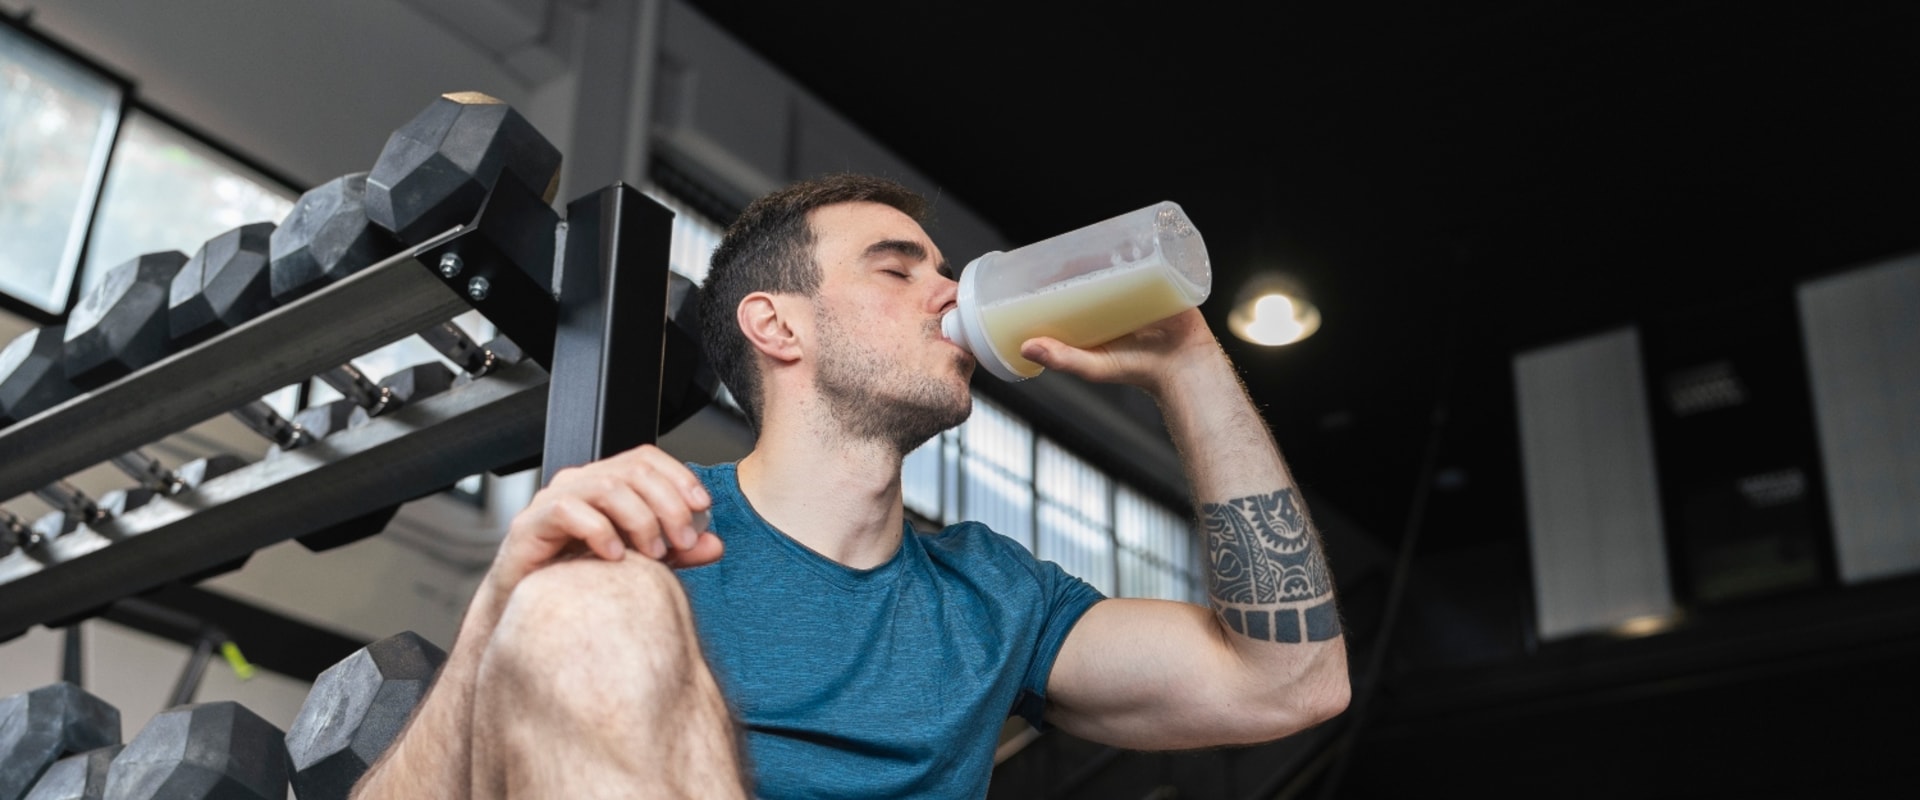 Does protein powder affect your testosterone?